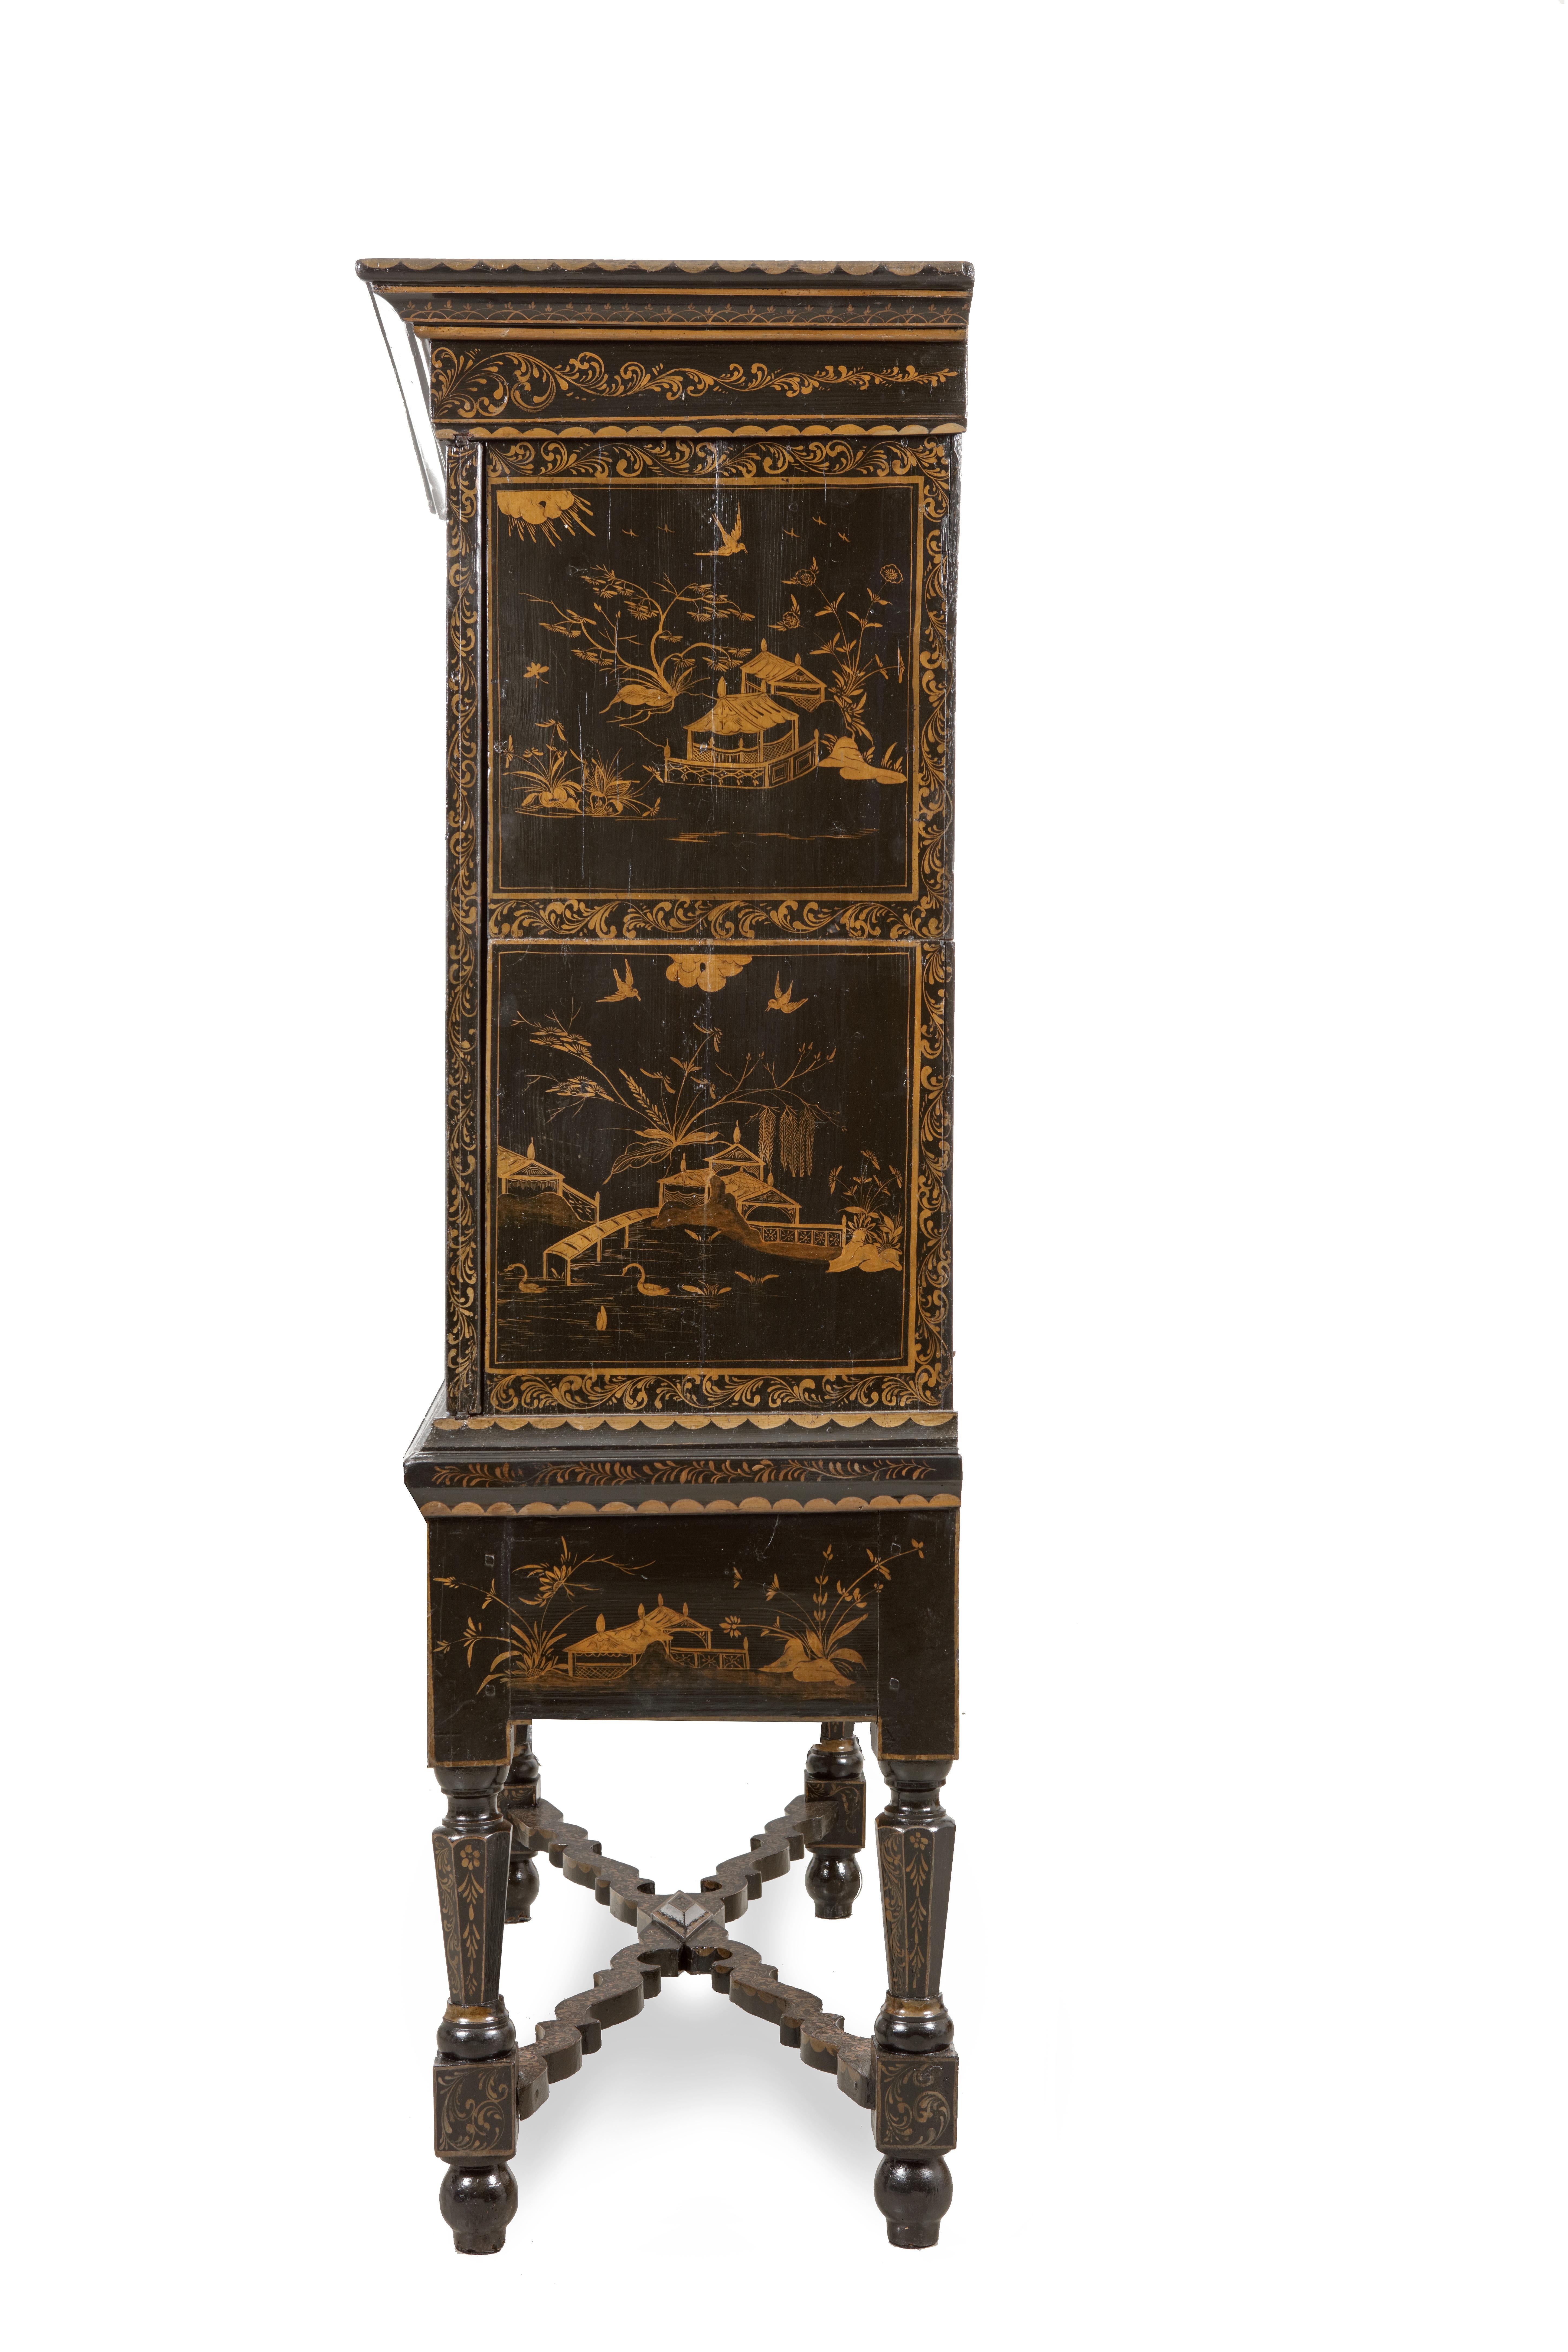 Pine Exceptional Dutch Lacquered Chinoiserie Cabinet on Stand, 17th Century